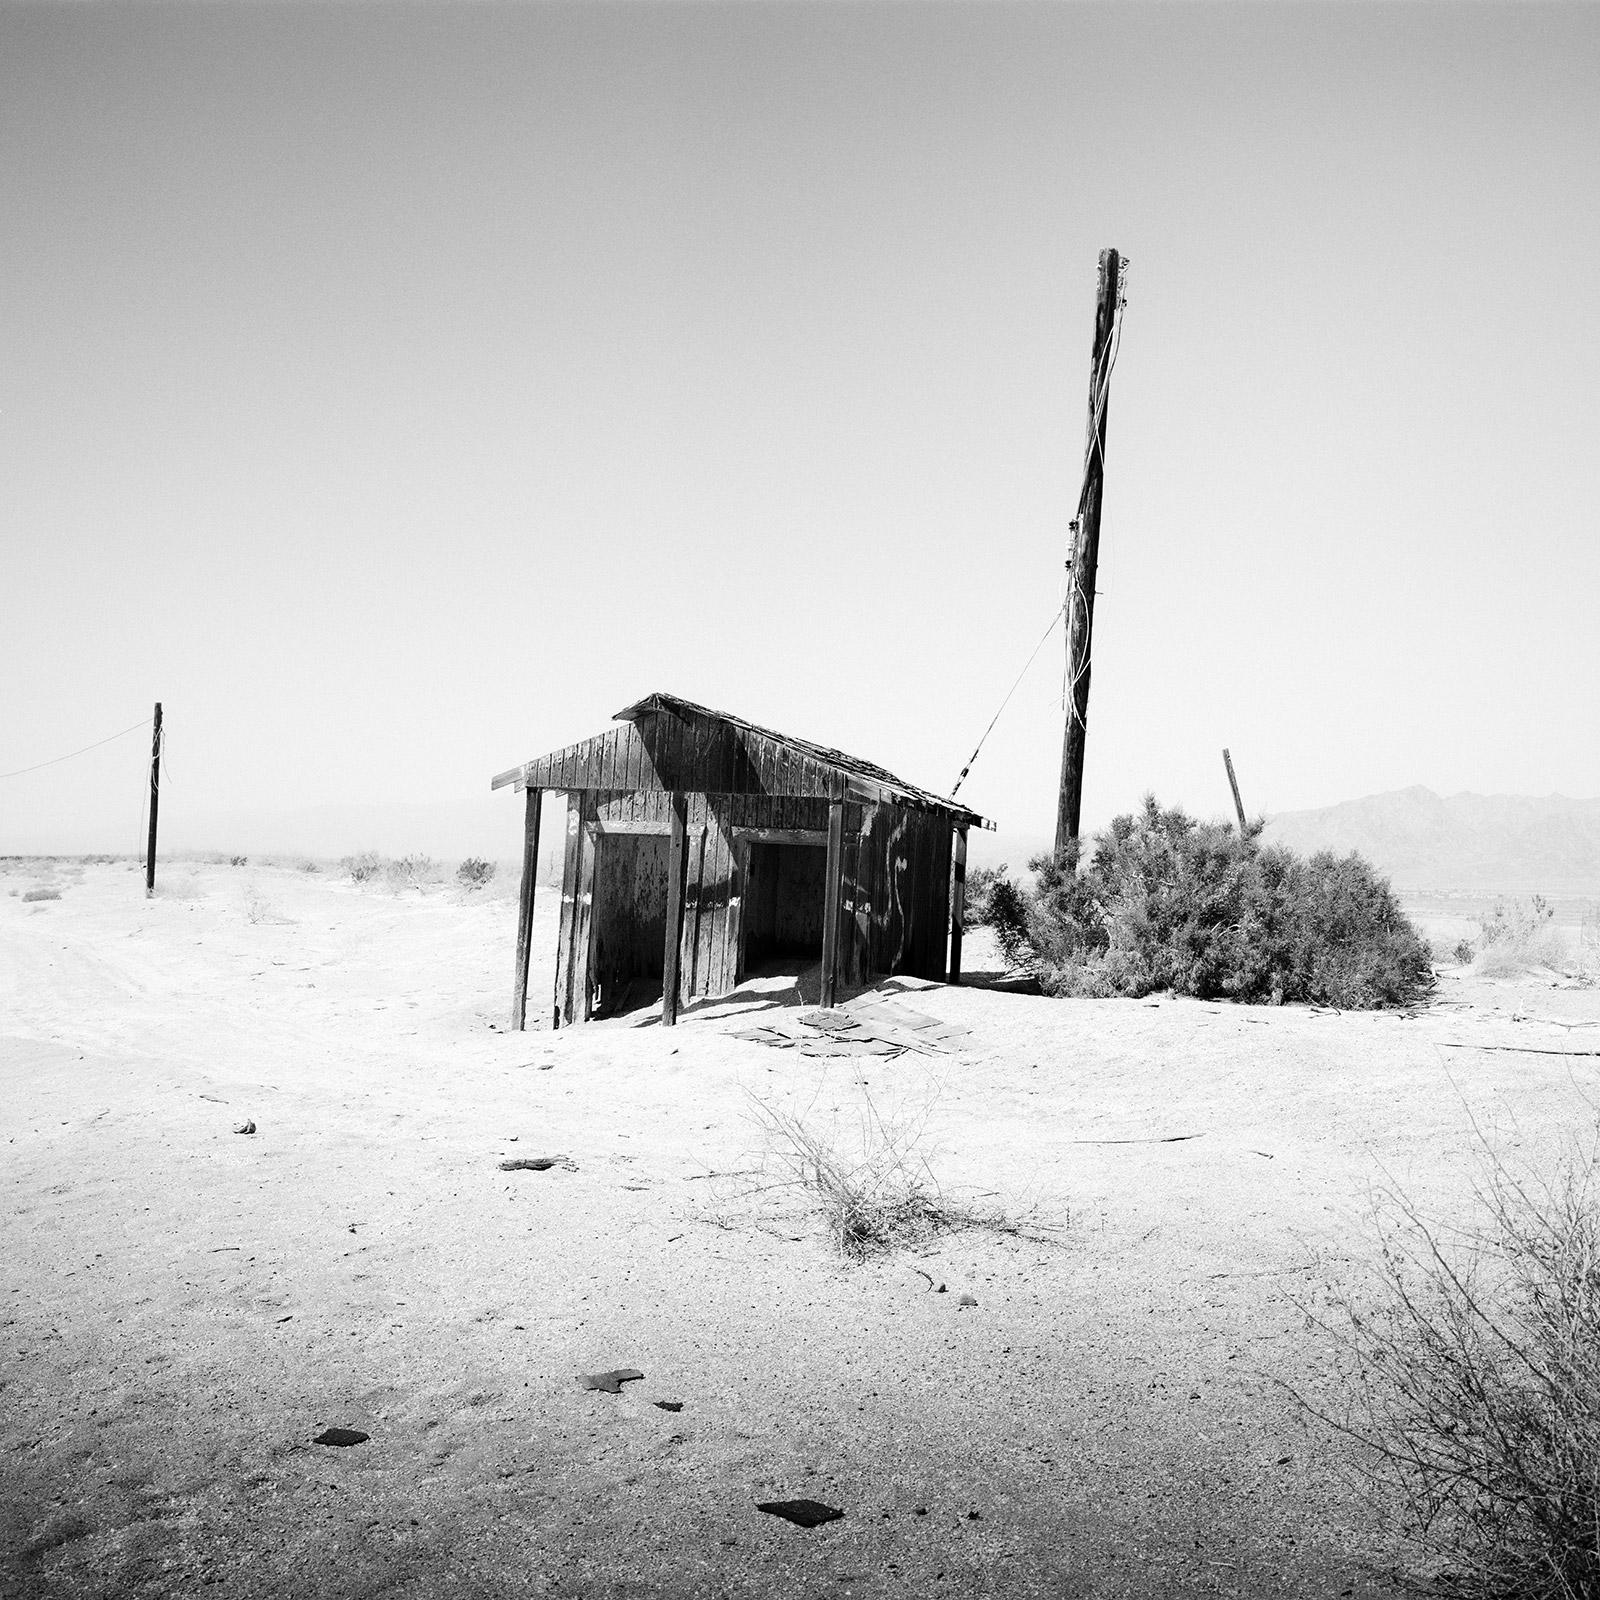 Gerald Berghammer Black and White Photograph - Abandoned Hut, desert, California, USA, black and white photography, landscape